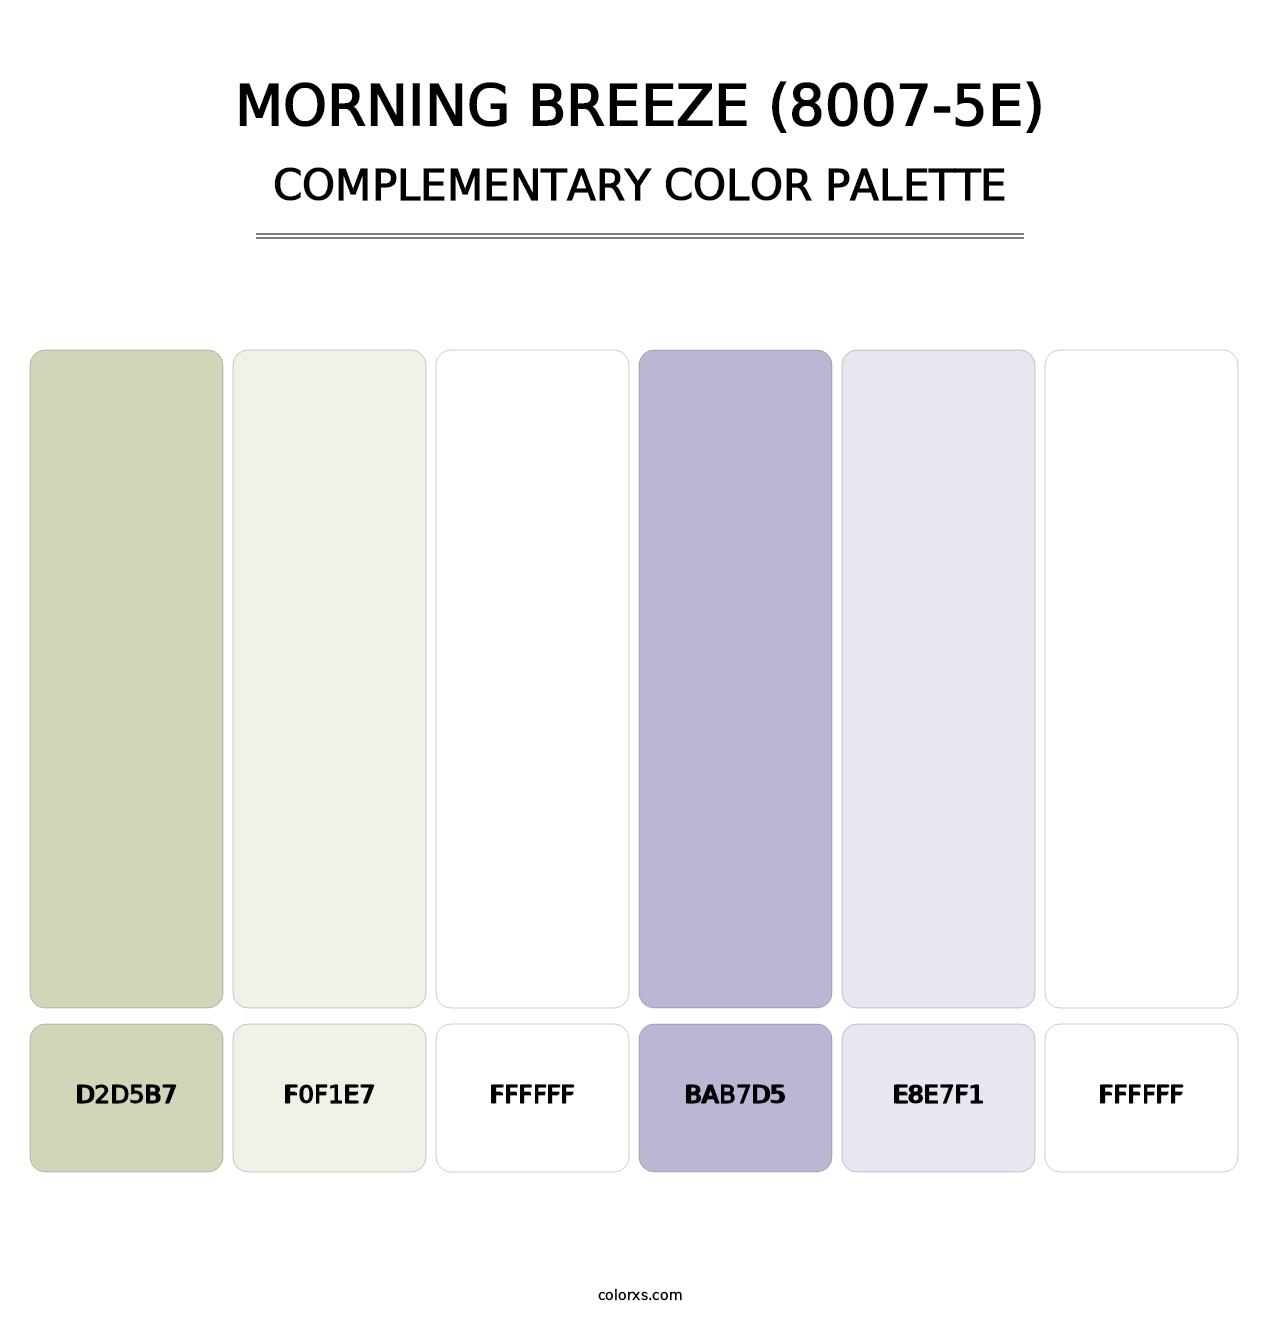 Morning Breeze (8007-5E) - Complementary Color Palette